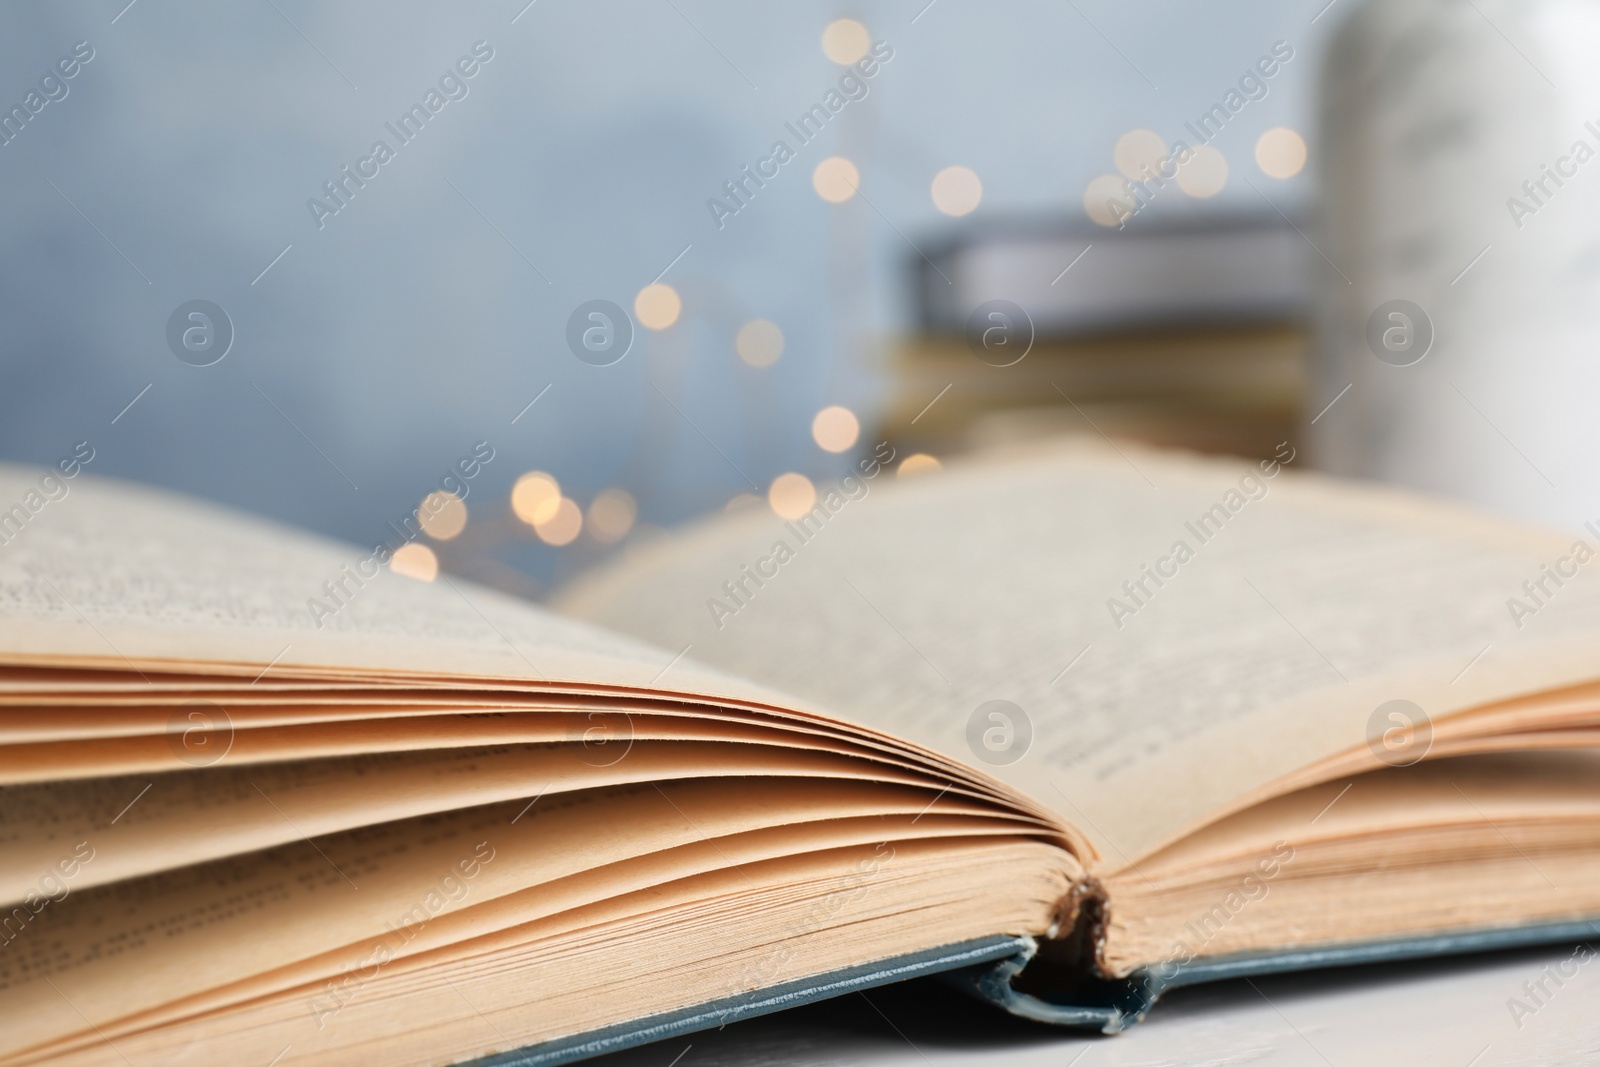 Photo of Open hardcover book on table against blurred background, closeup